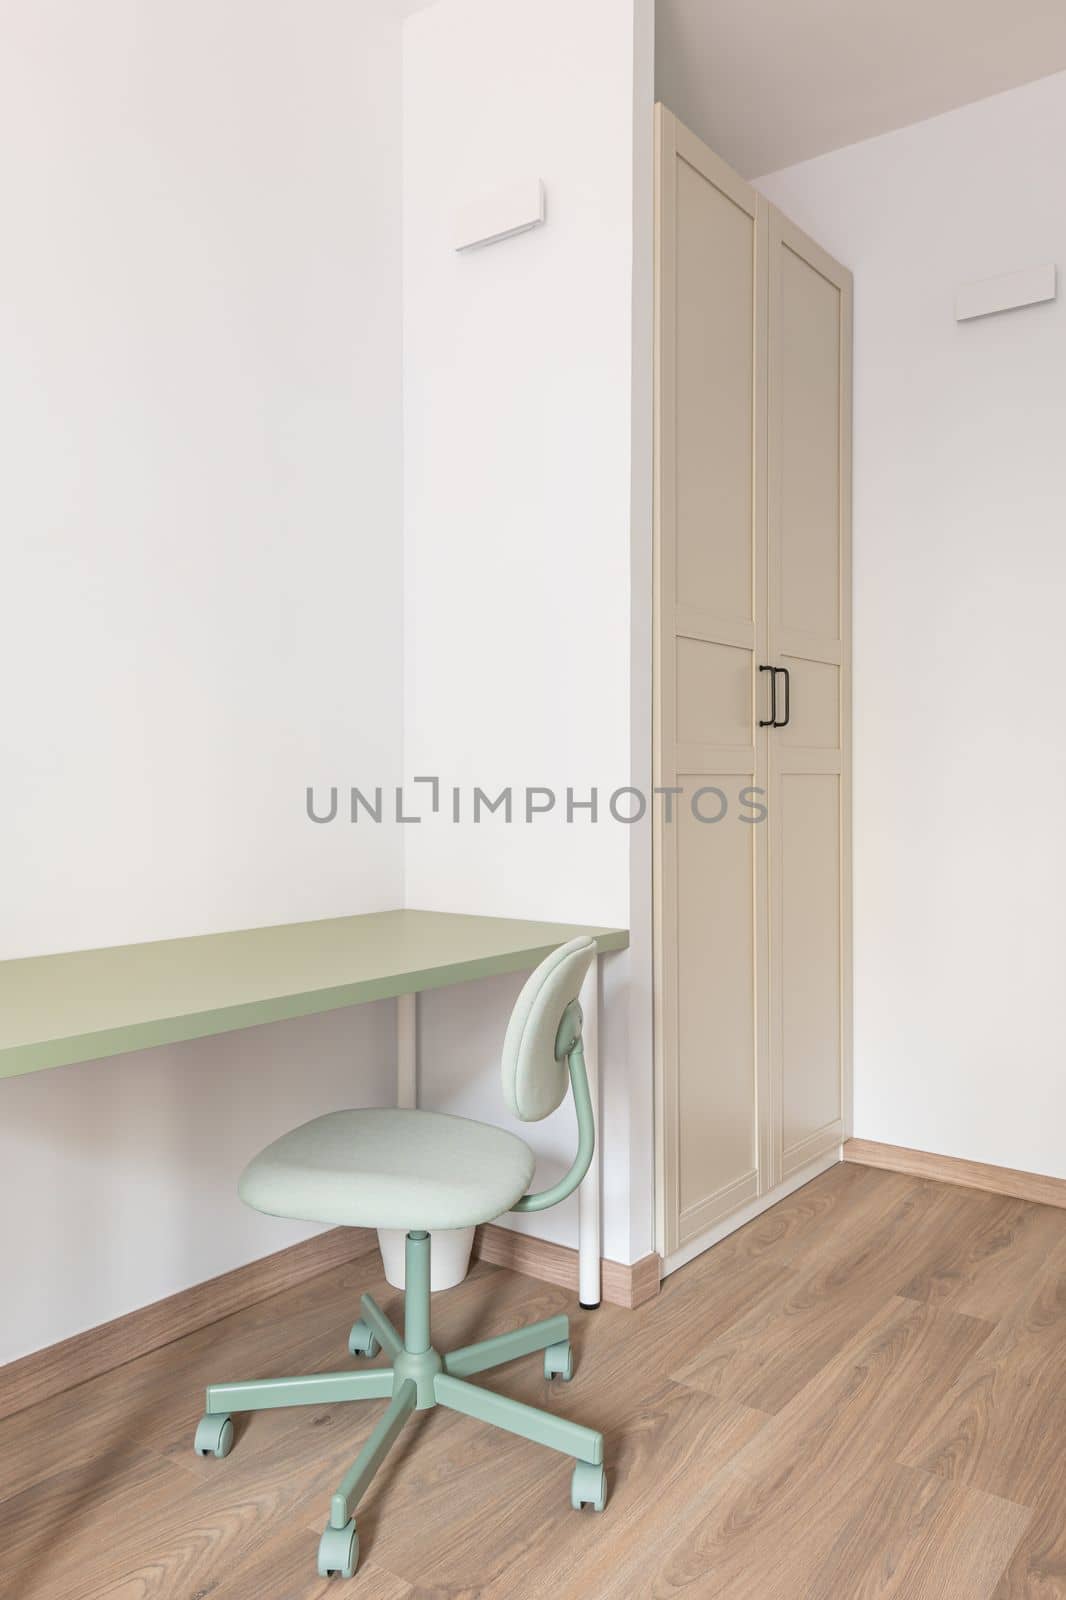 Part of the living room with white walls, built-in wardrobe, wood-effect parquet flooring. Against the wall is a work table with a mint-colored top and a mint-colored leather chair. by apavlin